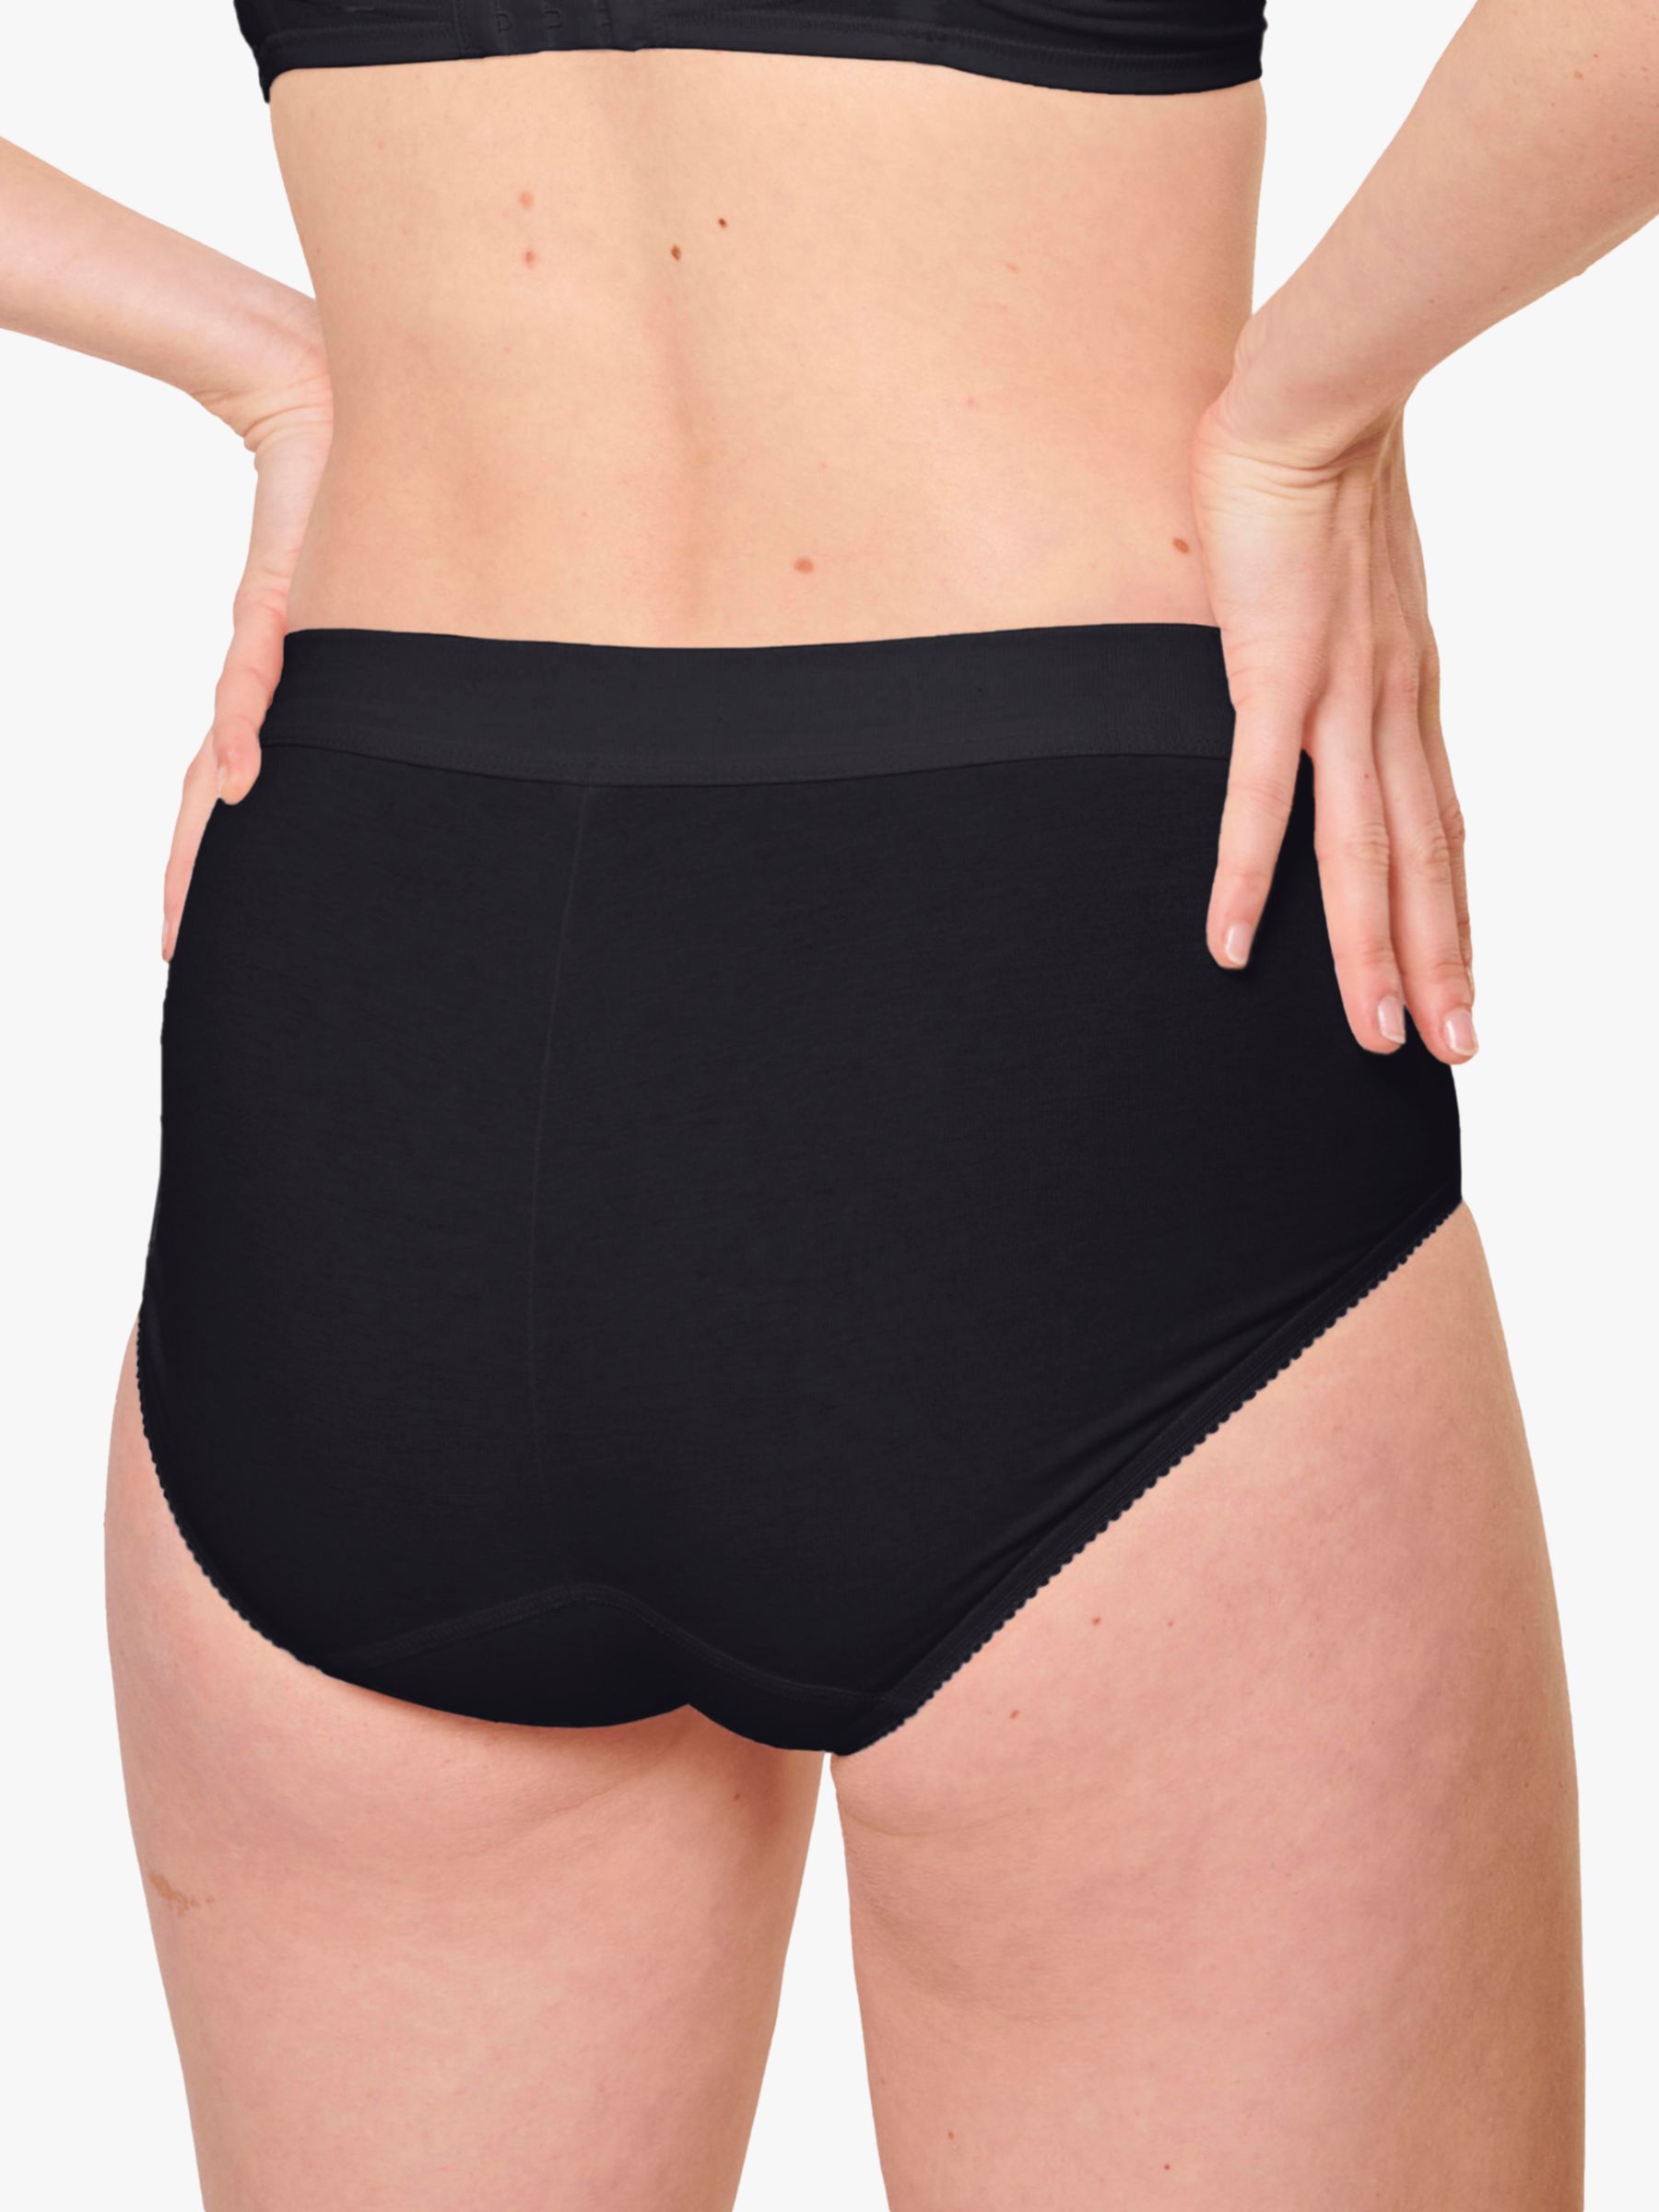 sloggi Double Comfort Maxi Knickers, Pack of 2, Black, 10